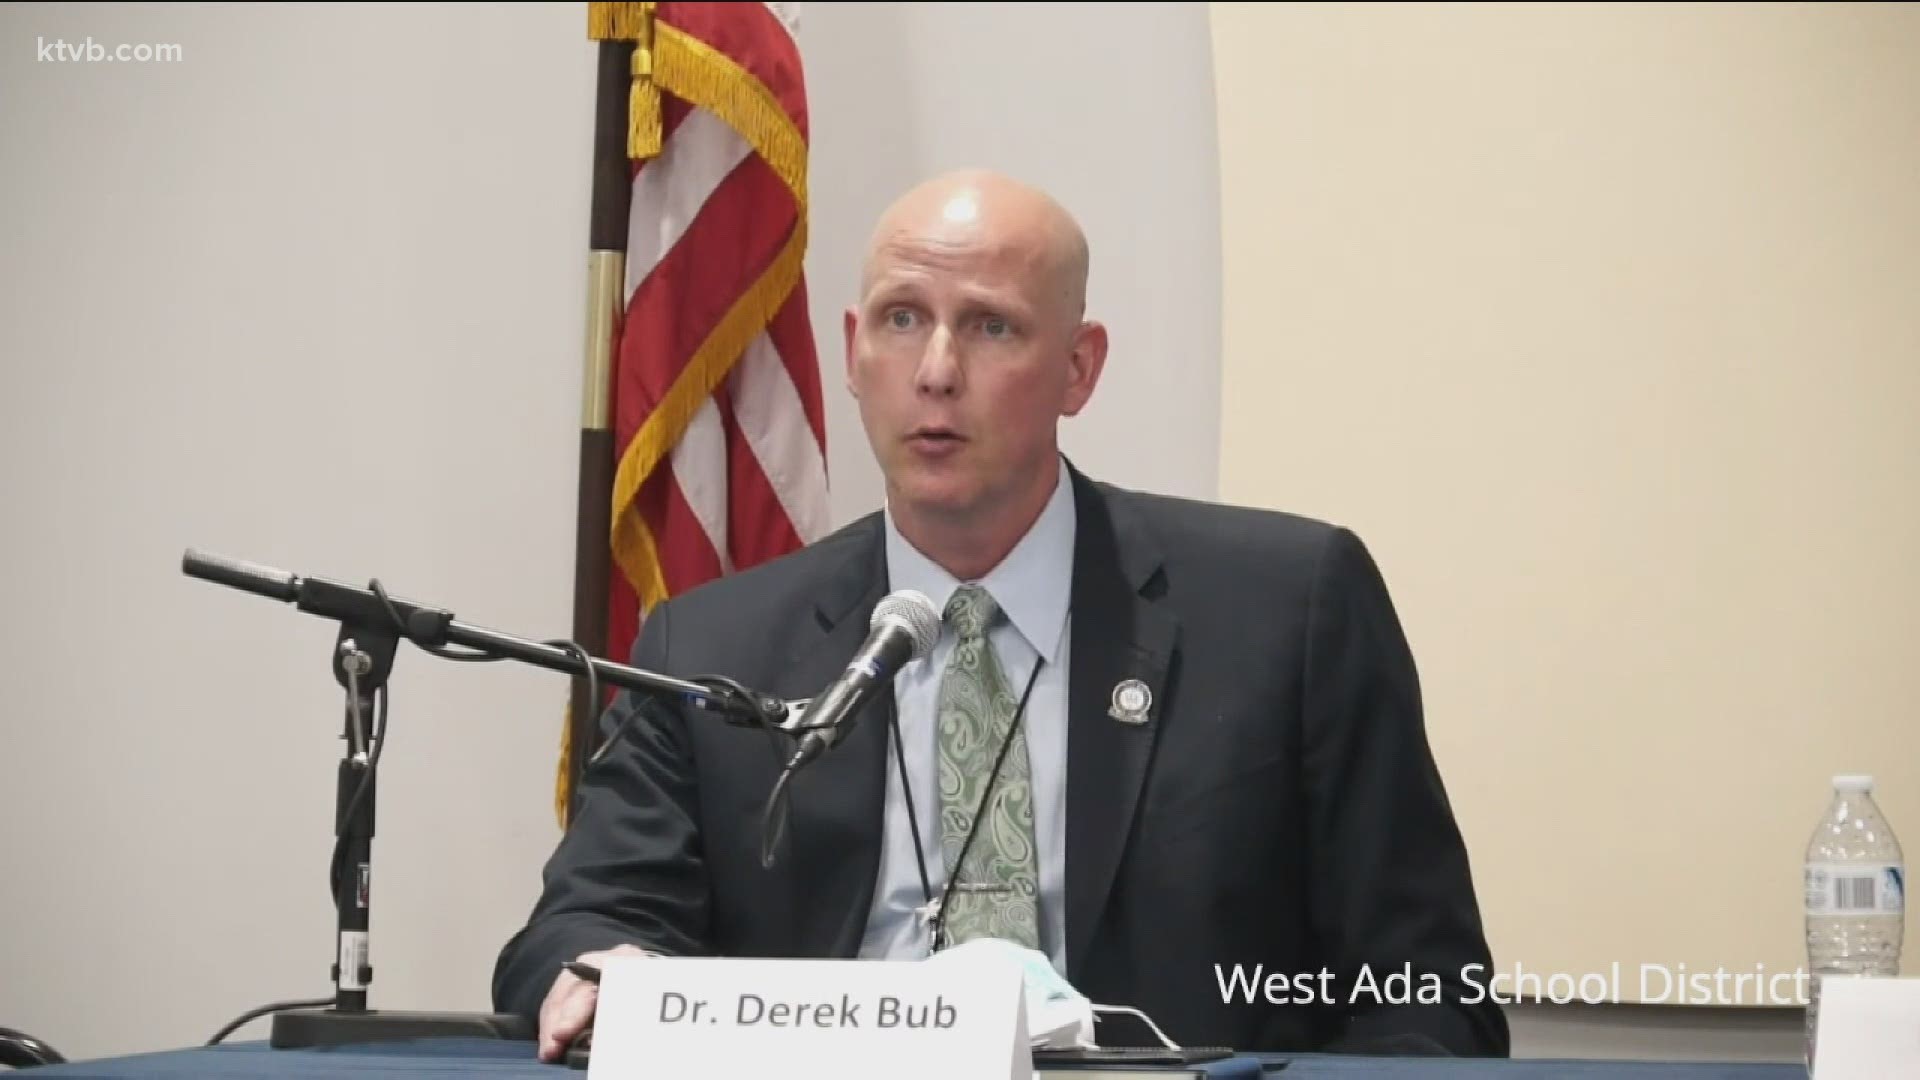 Dr. Derek Bub was chosen from among four finalists for the position.